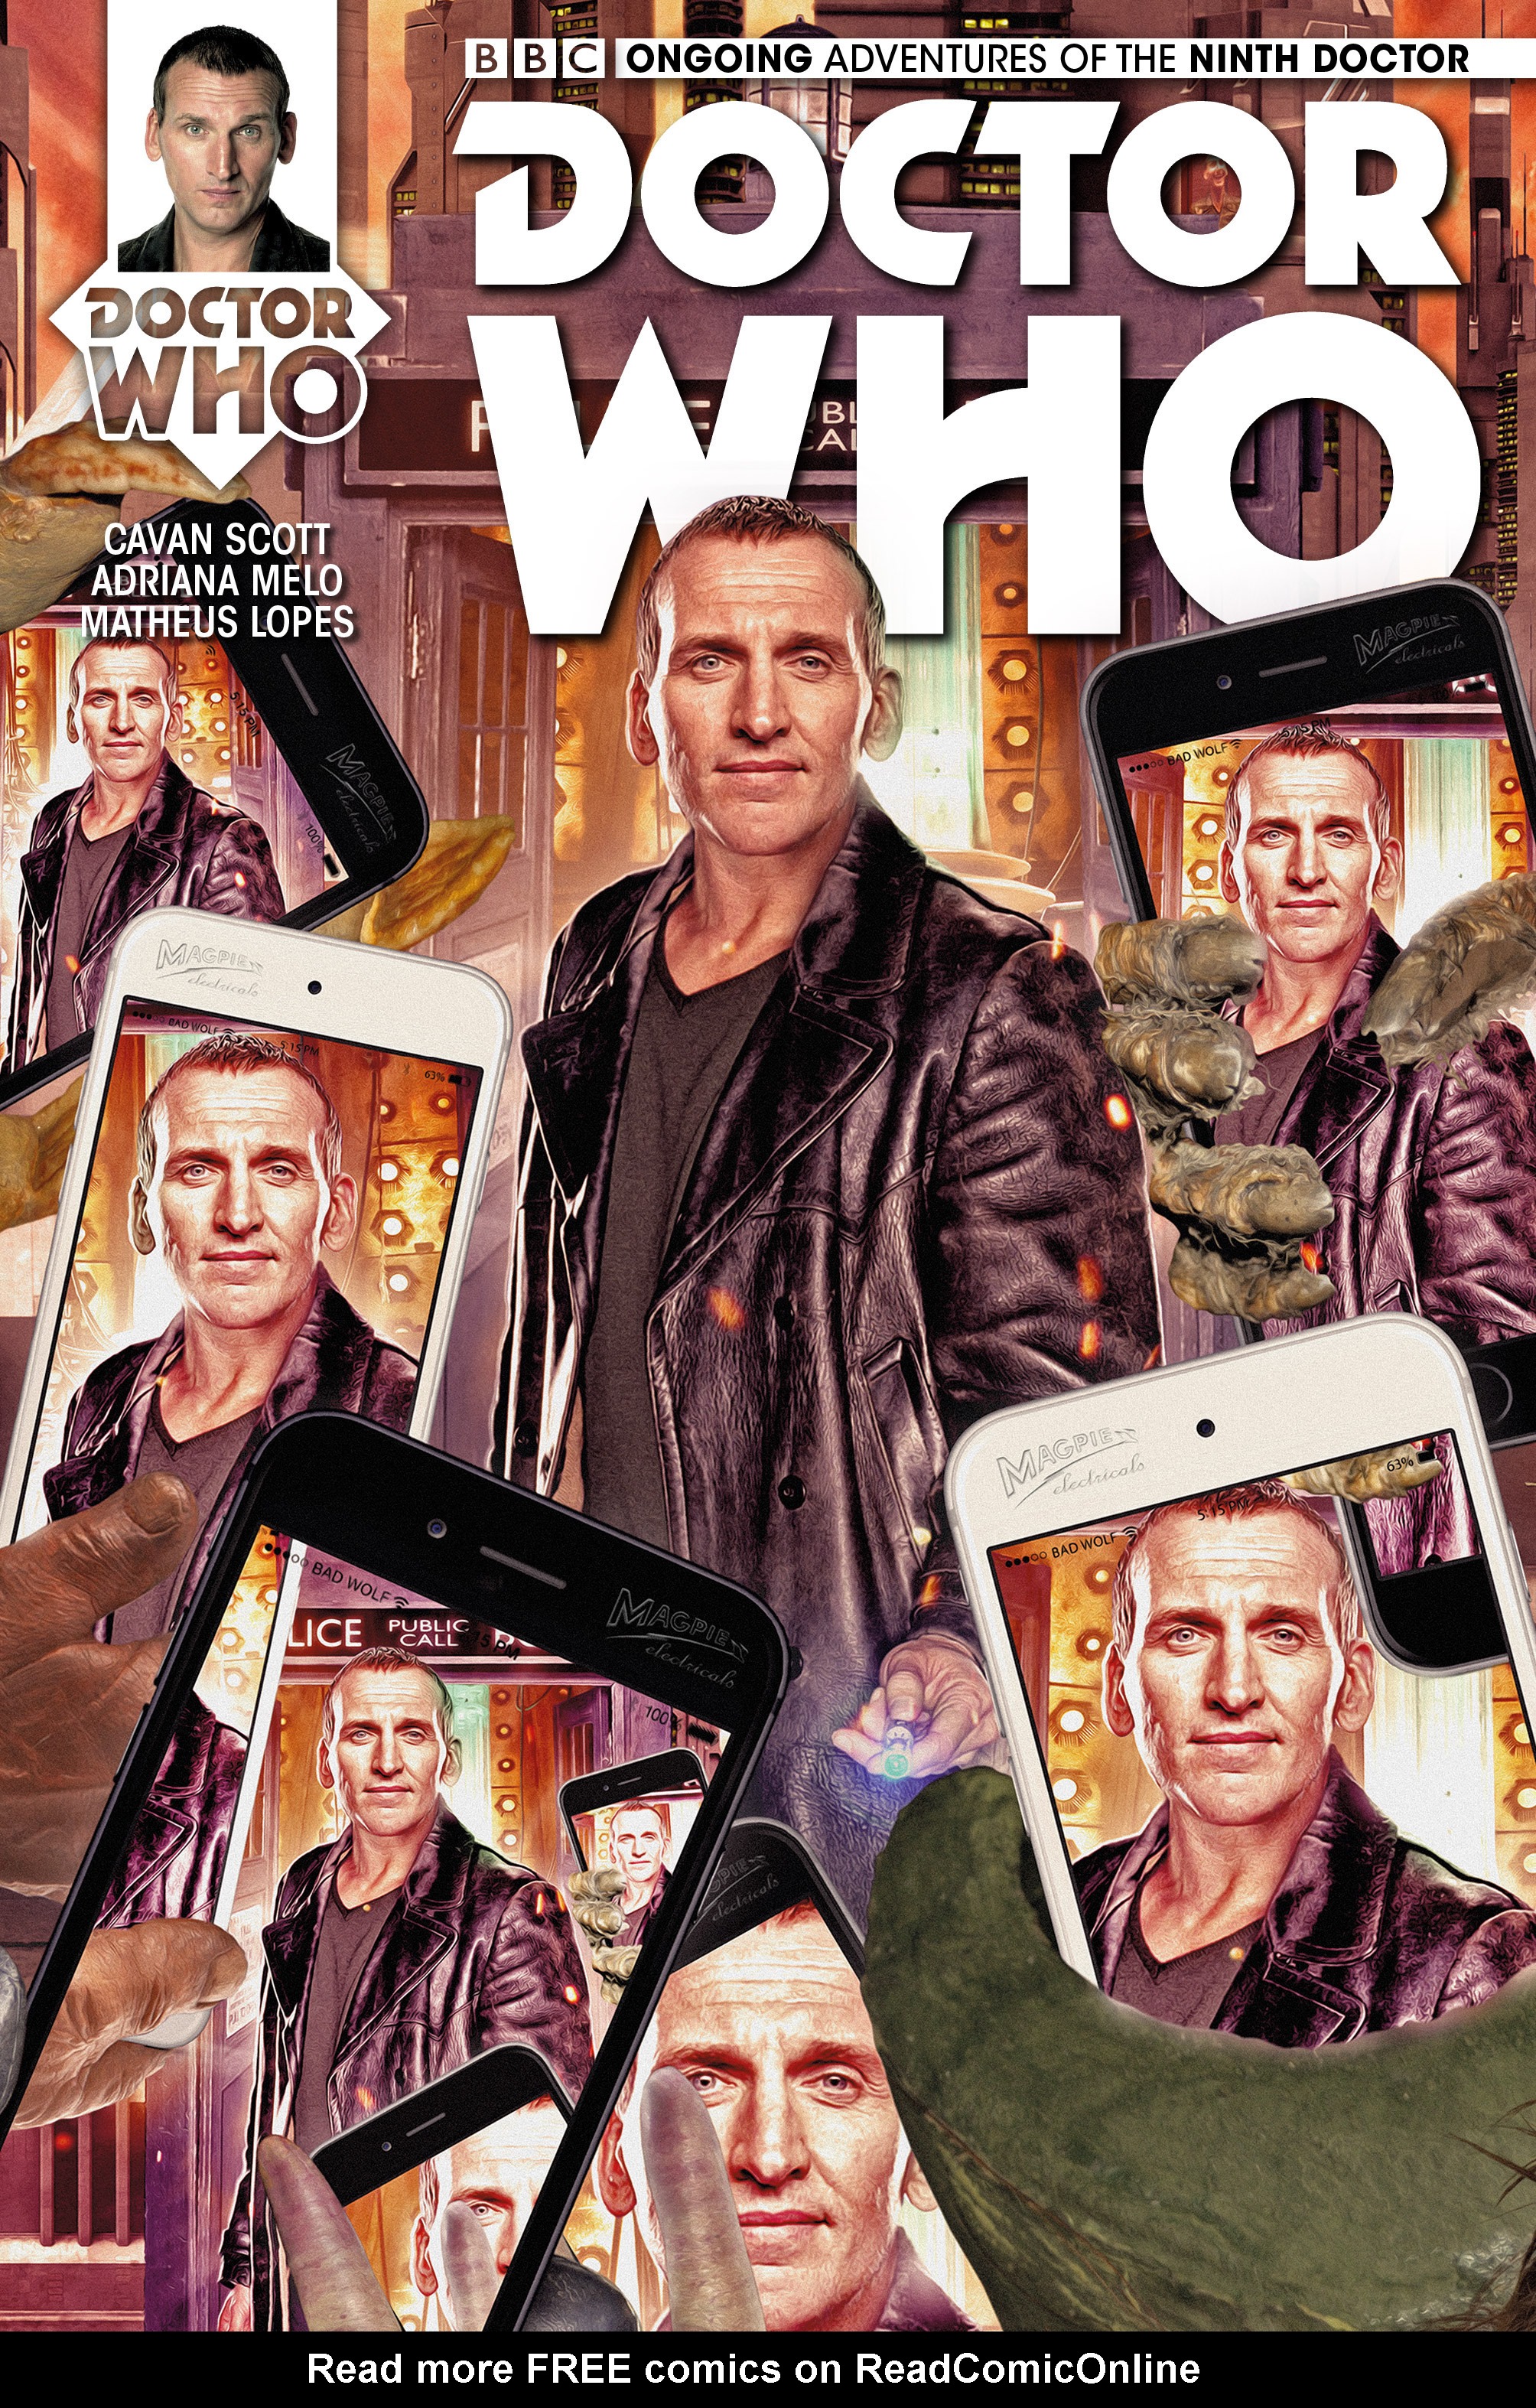 9th Doctor Porn - Doctor Who The Ninth Doctor 2016 Issue 1 | Read Doctor Who The Ninth Doctor  2016 Issue 1 comic online in high quality. Read Full Comic online for free  - Read comics online in high quality .